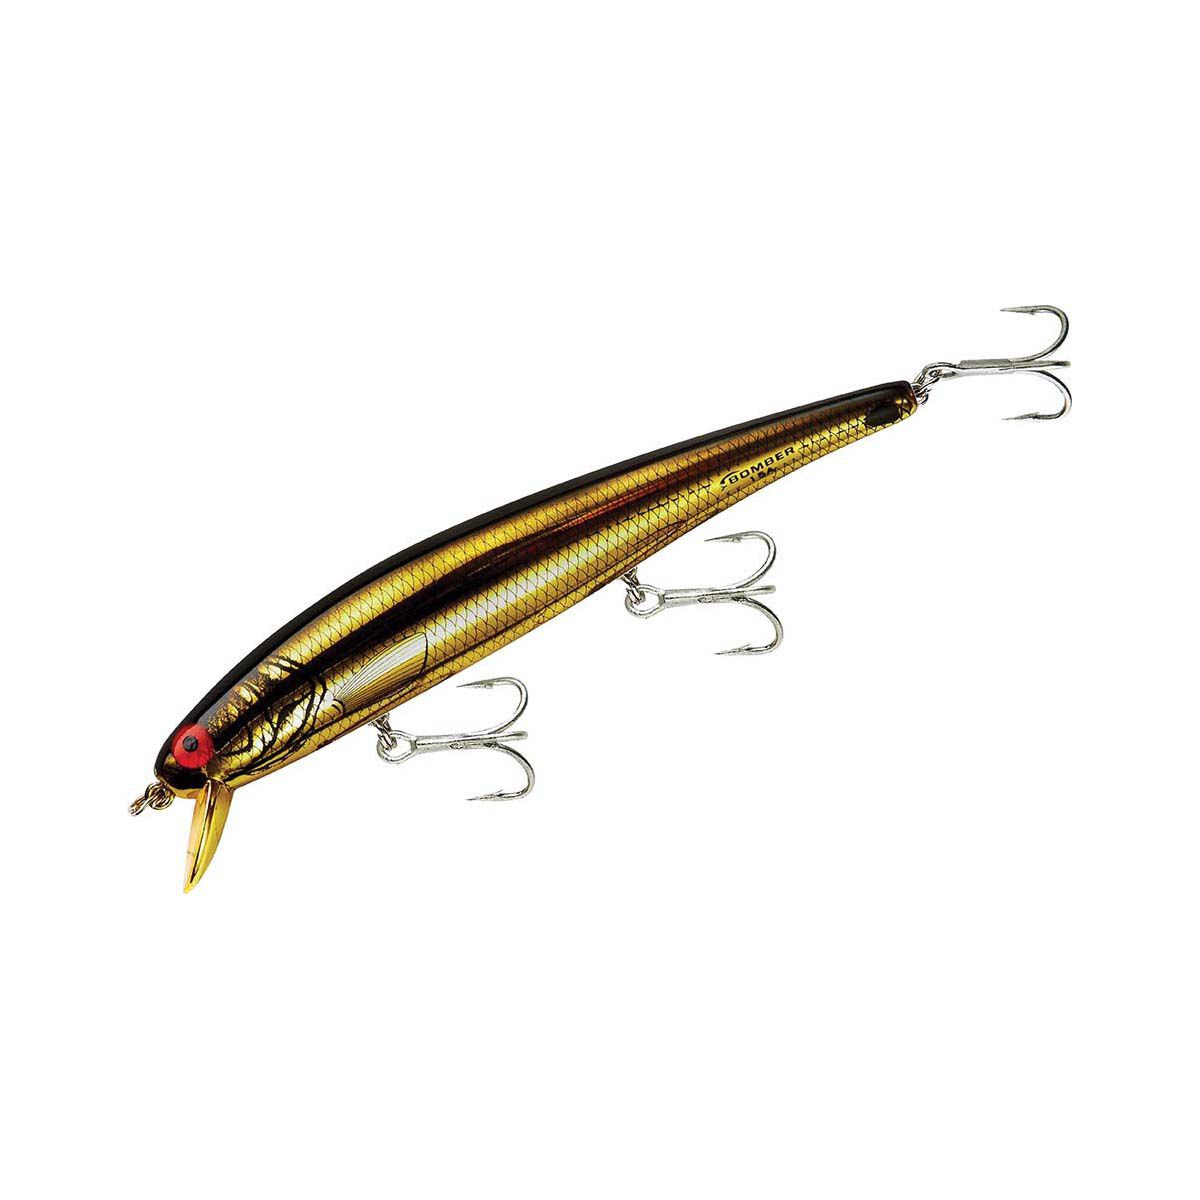 L and S Bass Master 15 Lure Vintage Fishing Lure